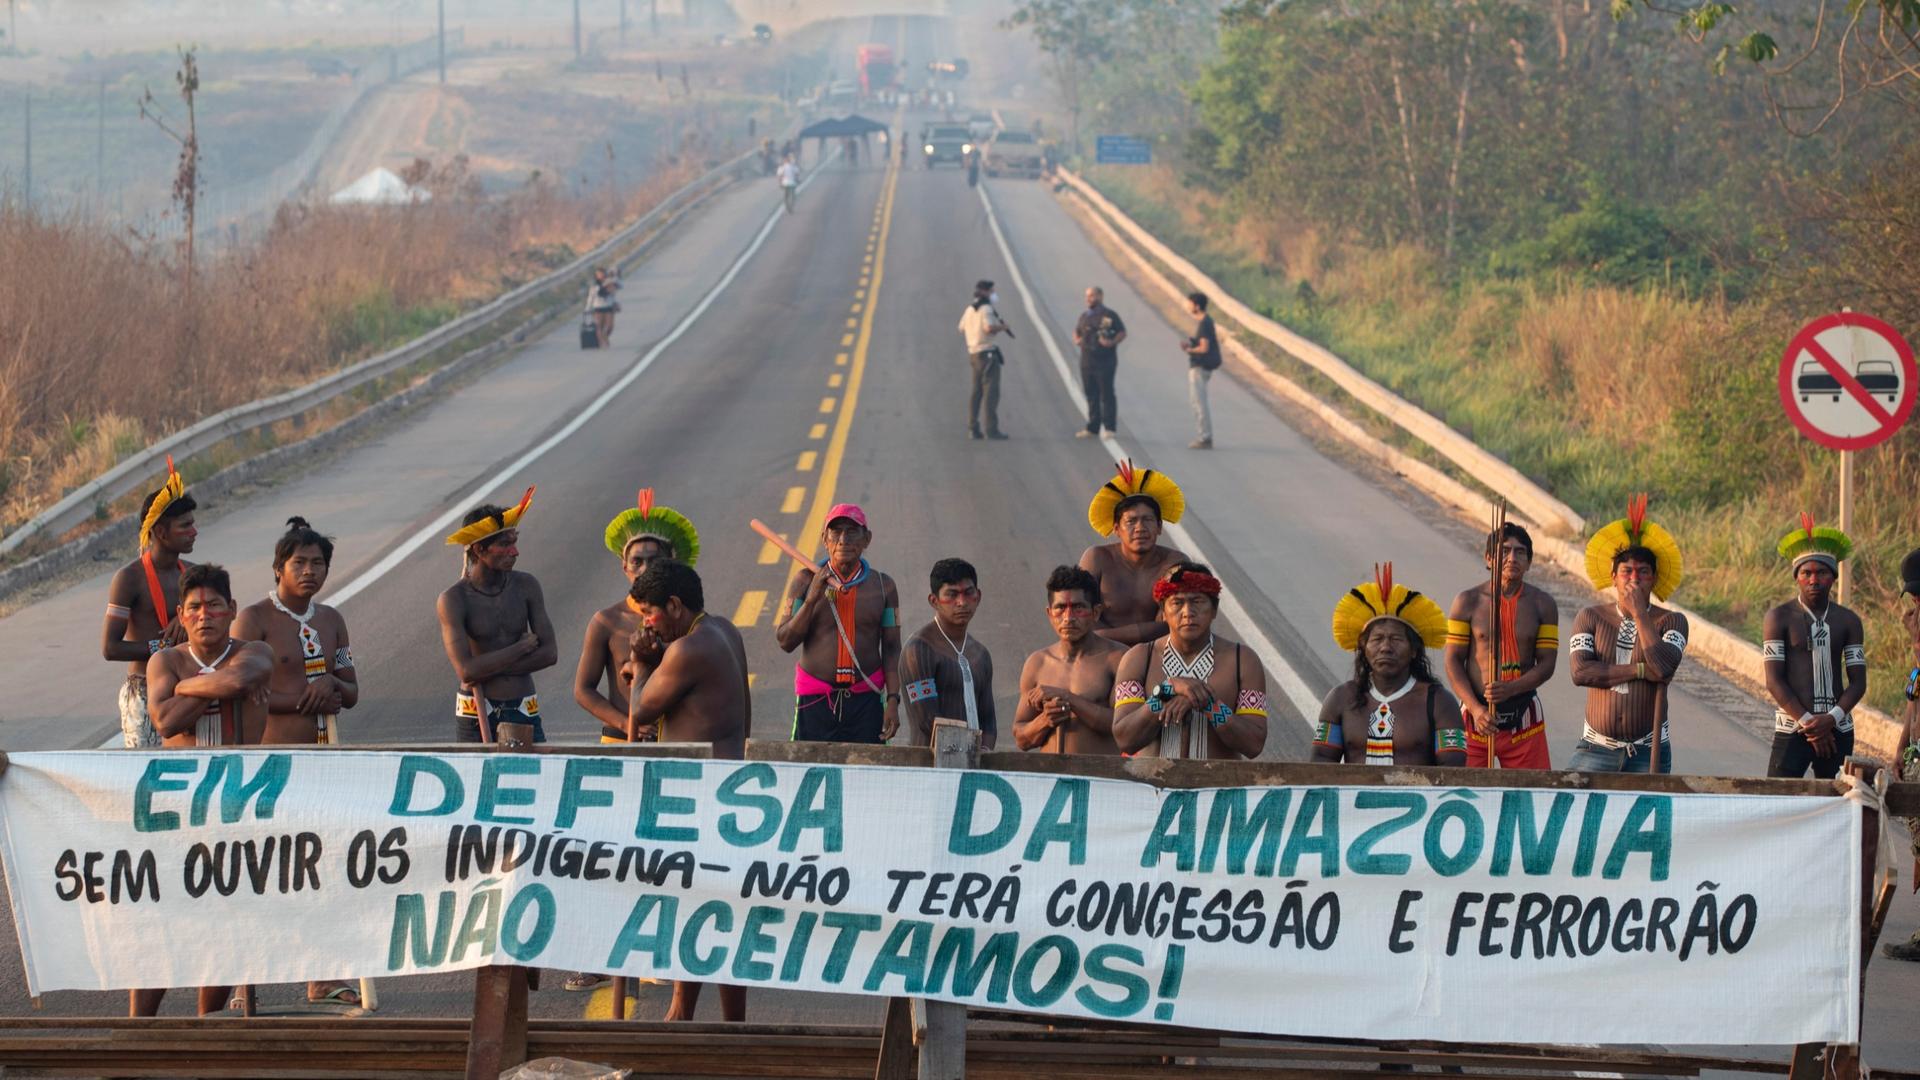 Kayapó Indigenous protesters block highway BR-163 with a banner that reads in Portuguese "Defending the Amazon. Without listening to Indigenous people, there will be no concession and nor grain railway," near Novo Progresso, Pará state, Brazil, Aug. 17, 2